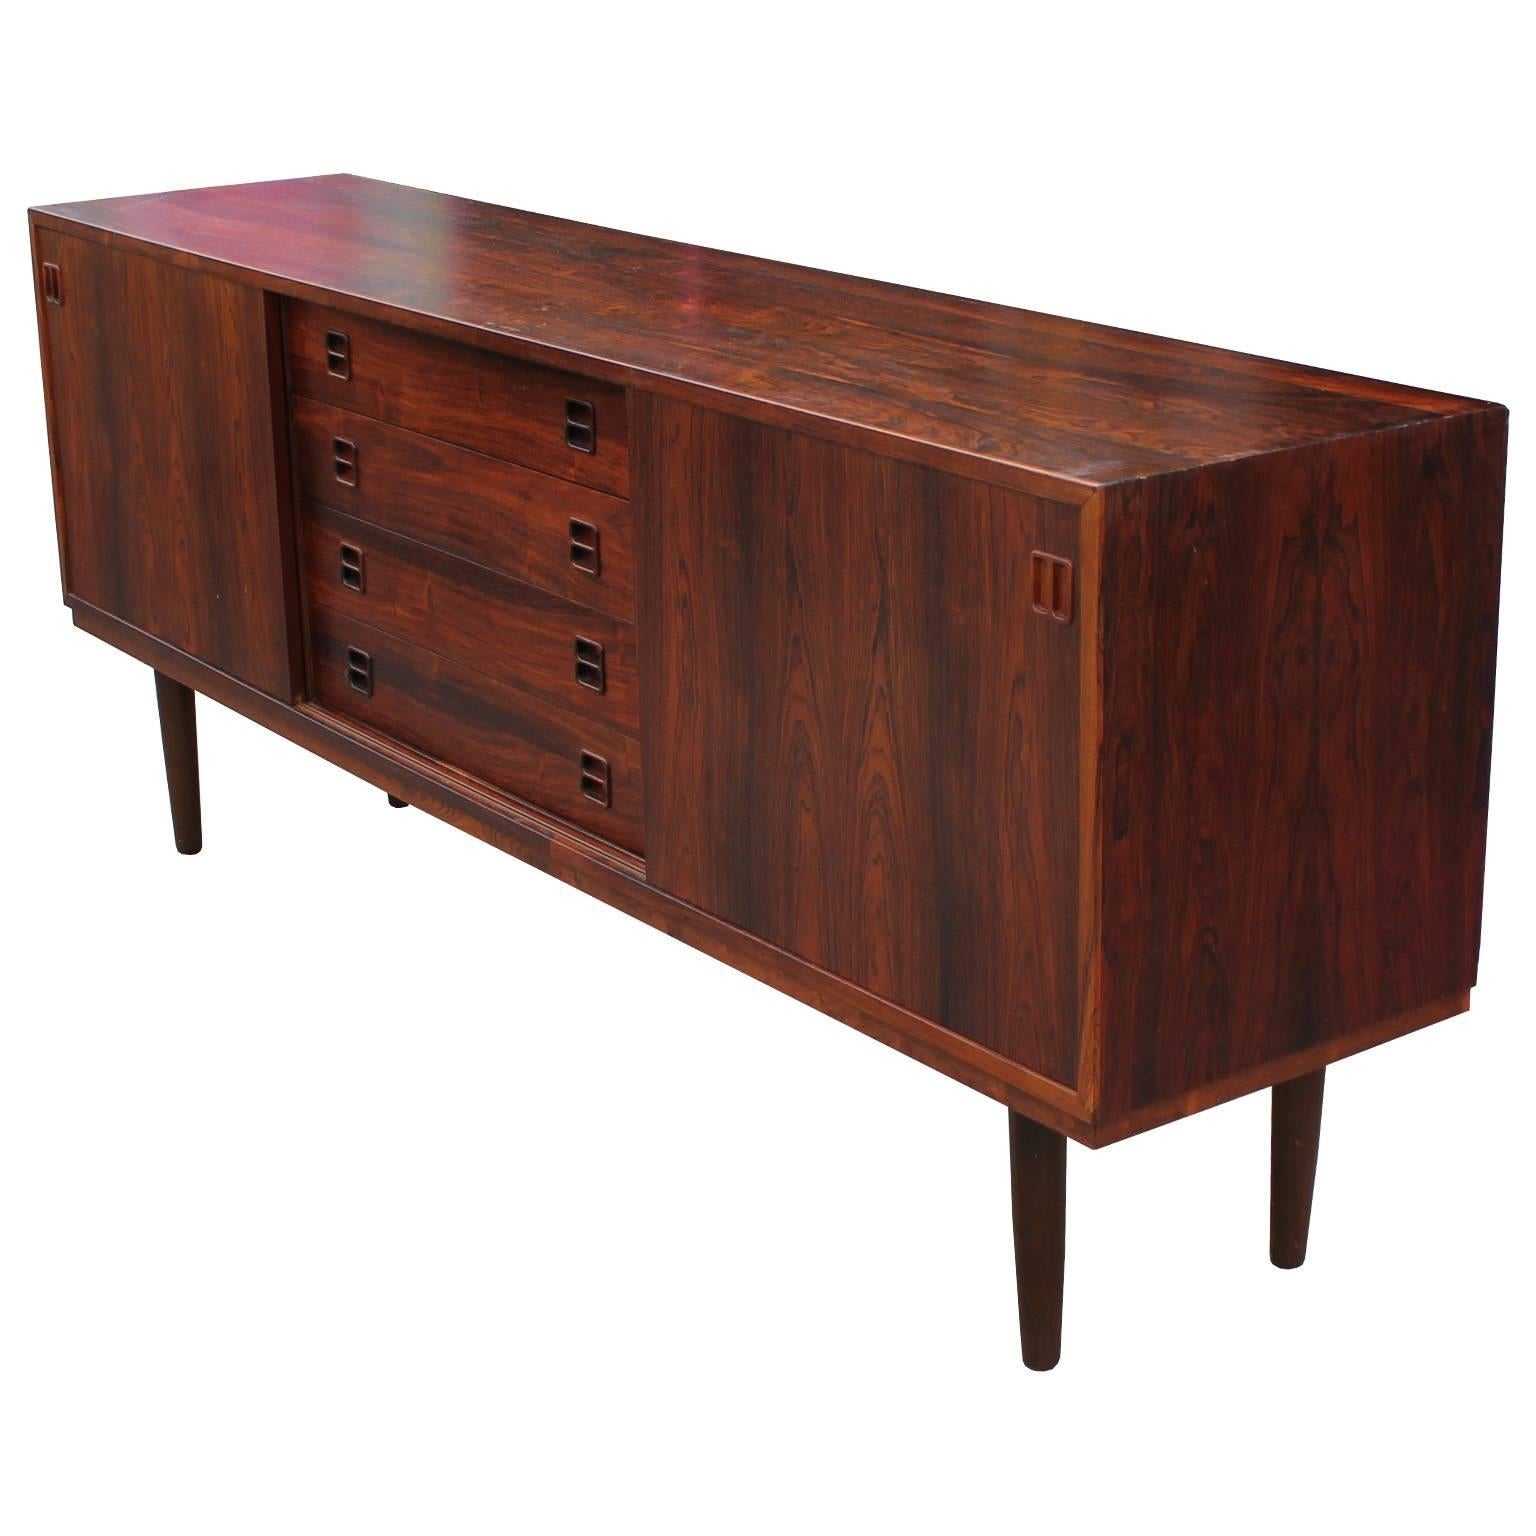 Great Brazilian rosewood sliding door sideboard or credenza. This wonderful sideboard has four drawers in the middle with two sliding doors on either side. This sideboard is in nice vintage condition with no major flaws to note. Attributed to Arne